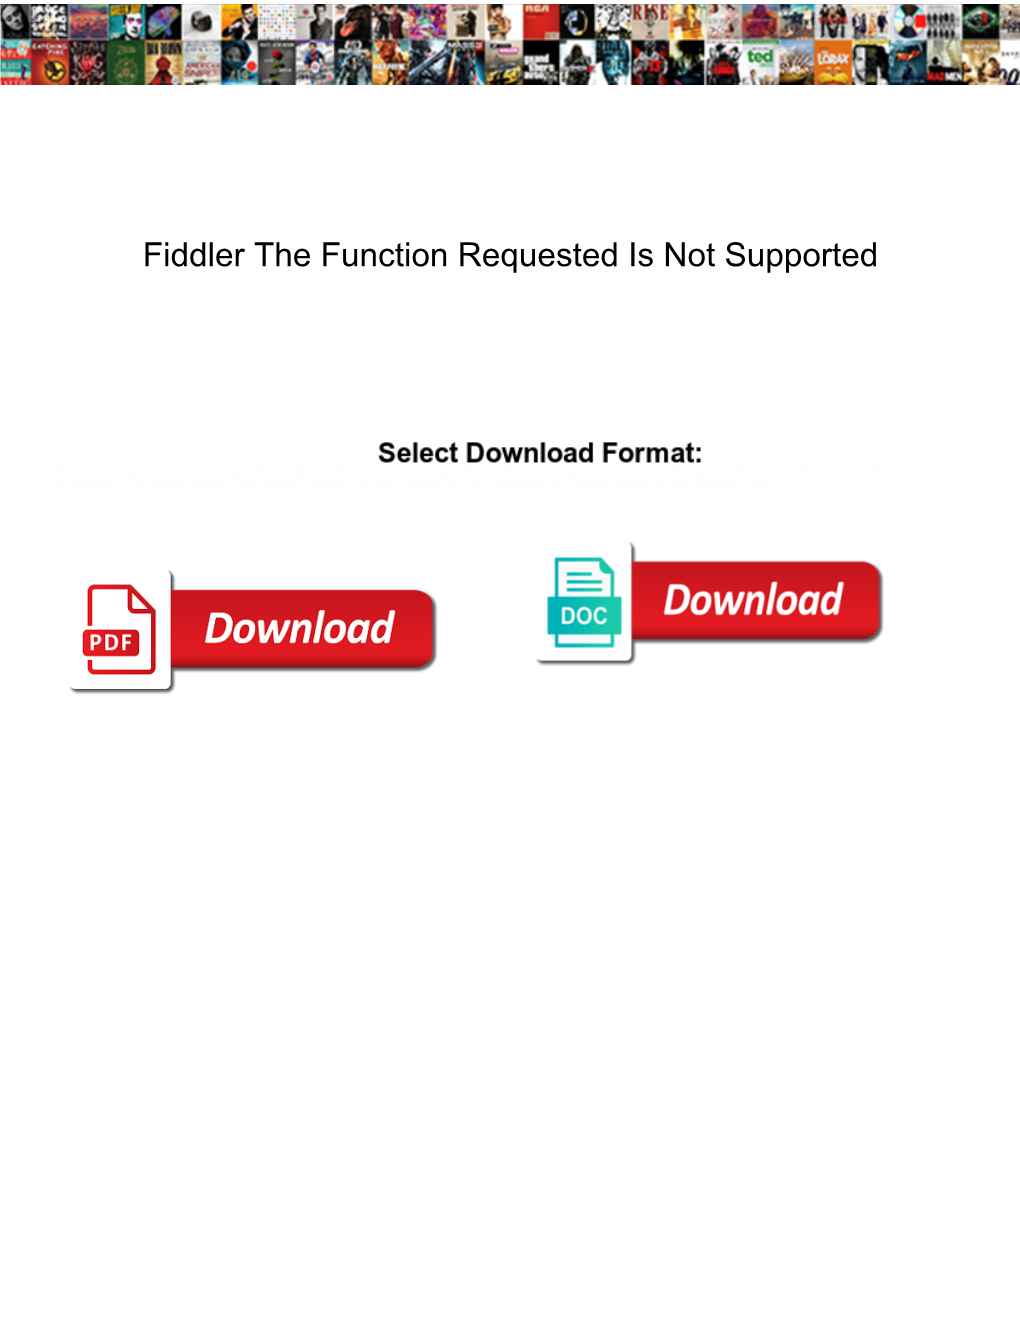 Fiddler the Function Requested Is Not Supported